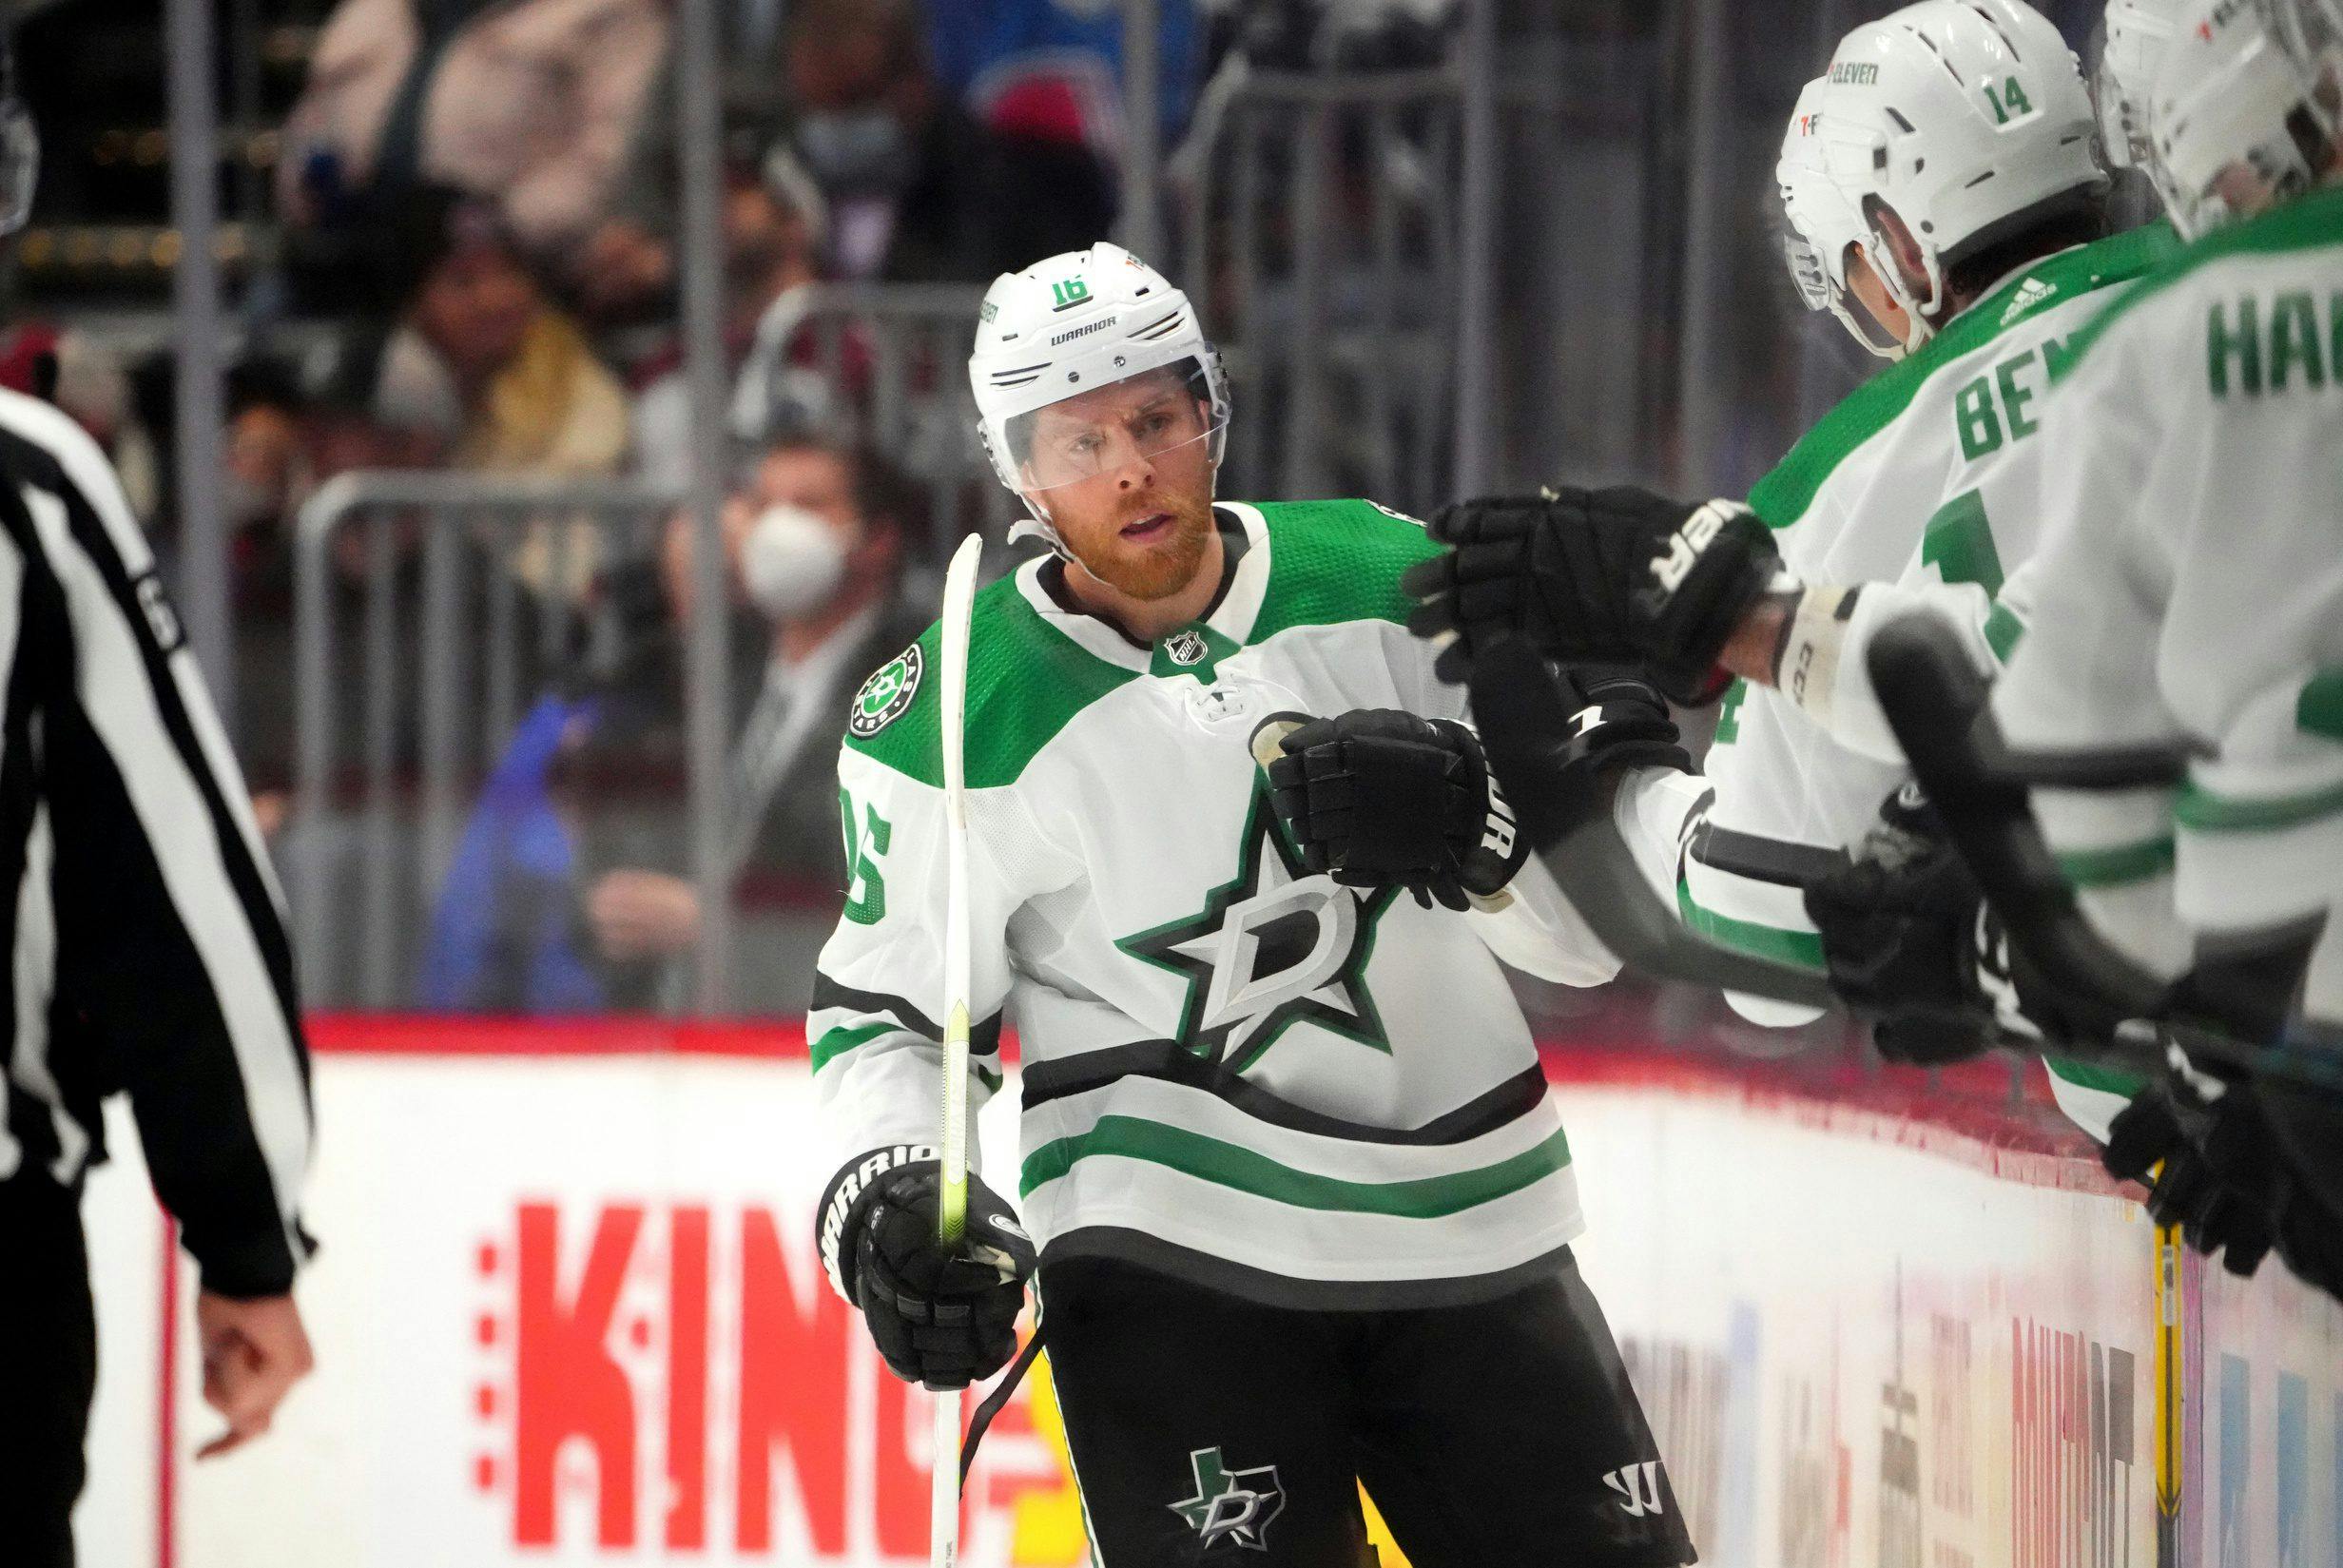 Joe Pavelski and the Dallas Stars have agreed to a one-year contract extension